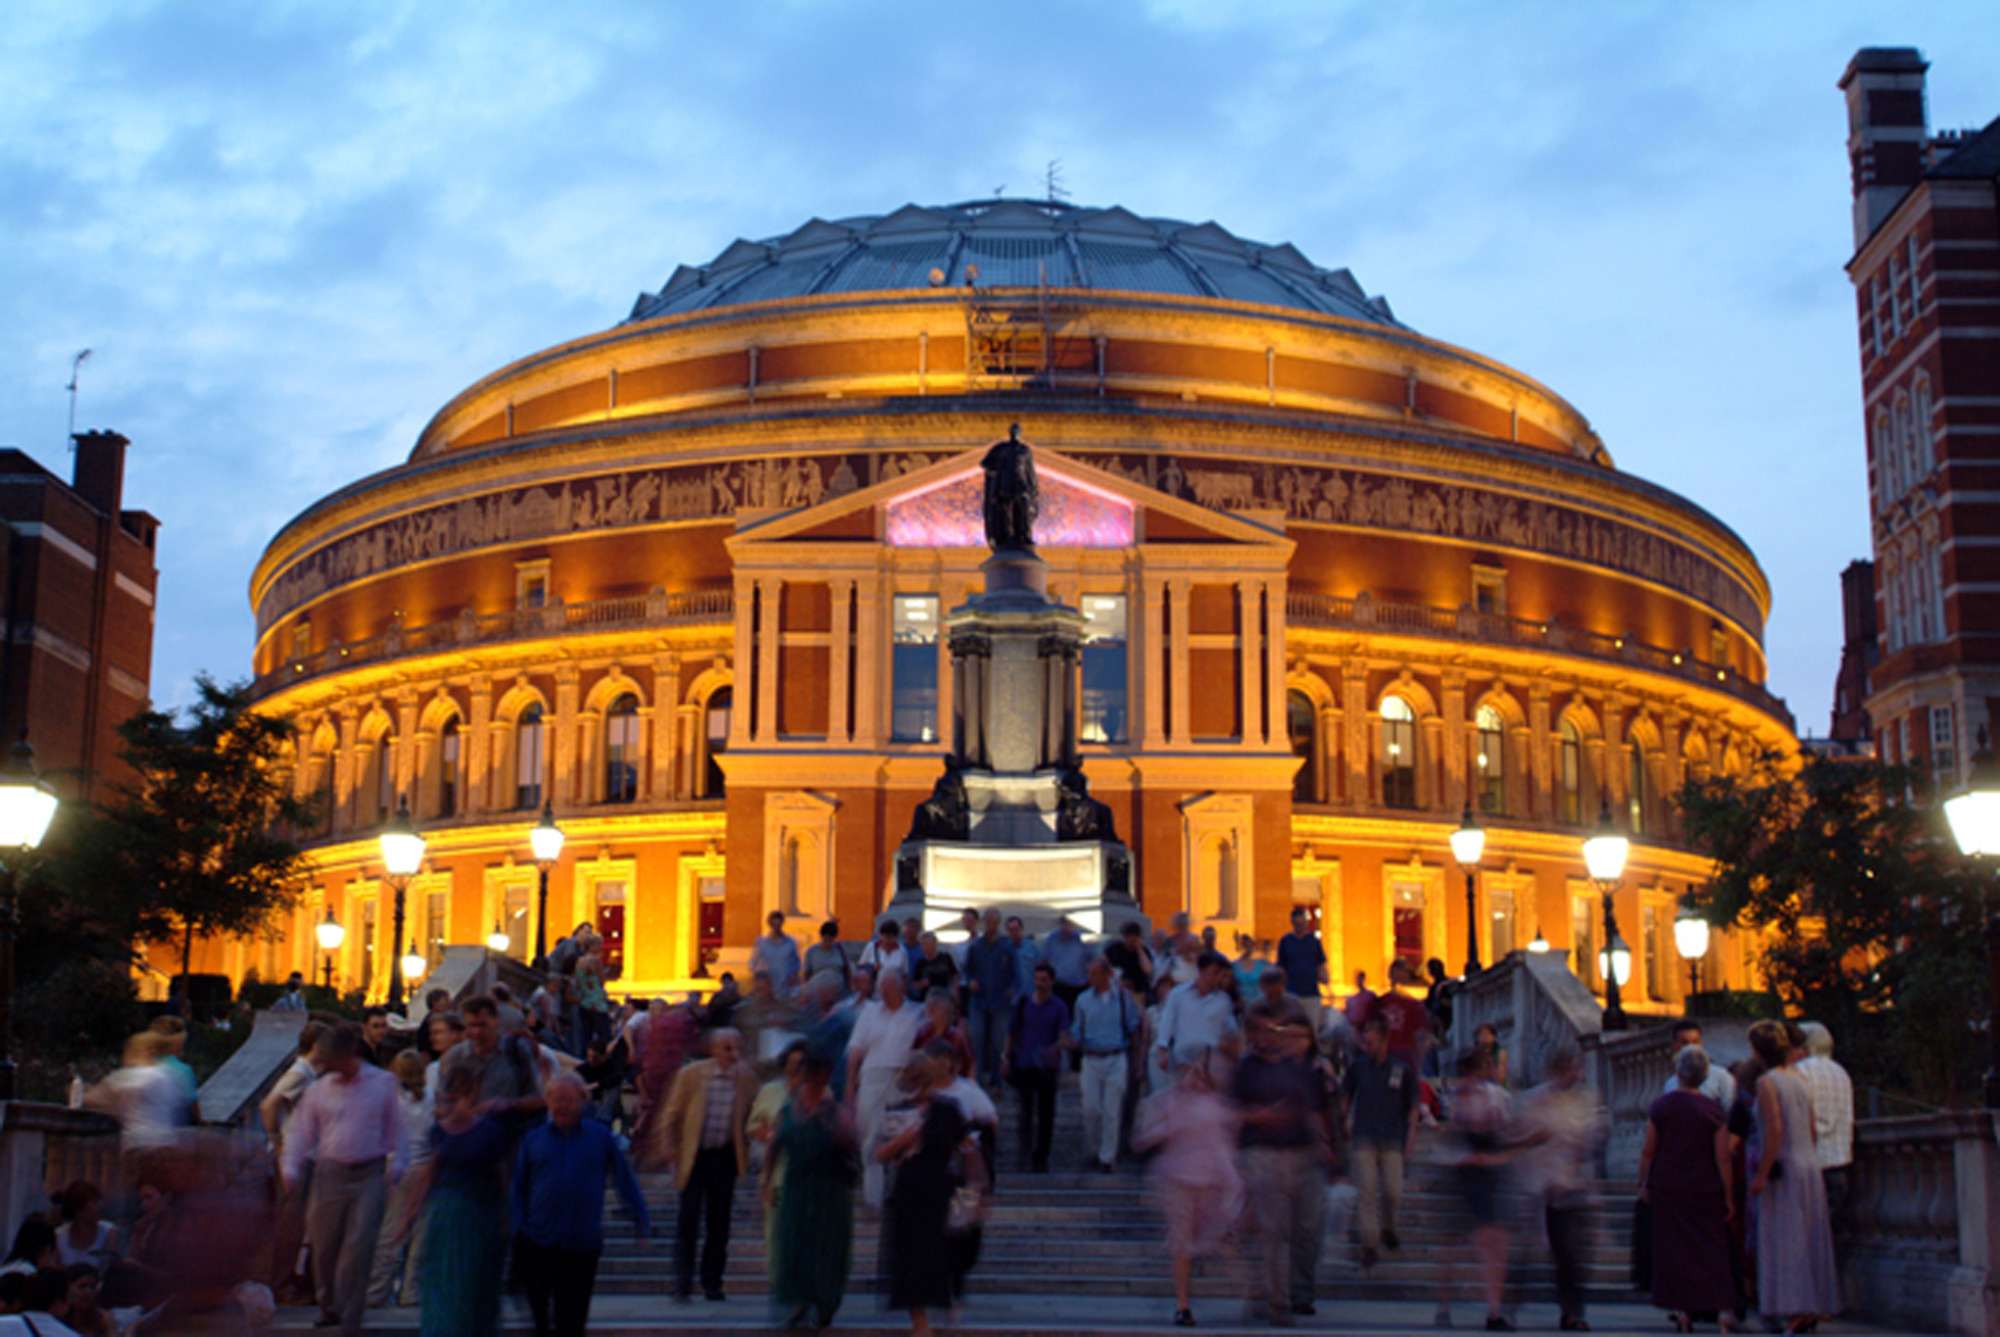 A beginners' guide to the BBC Proms Classical music and opera in